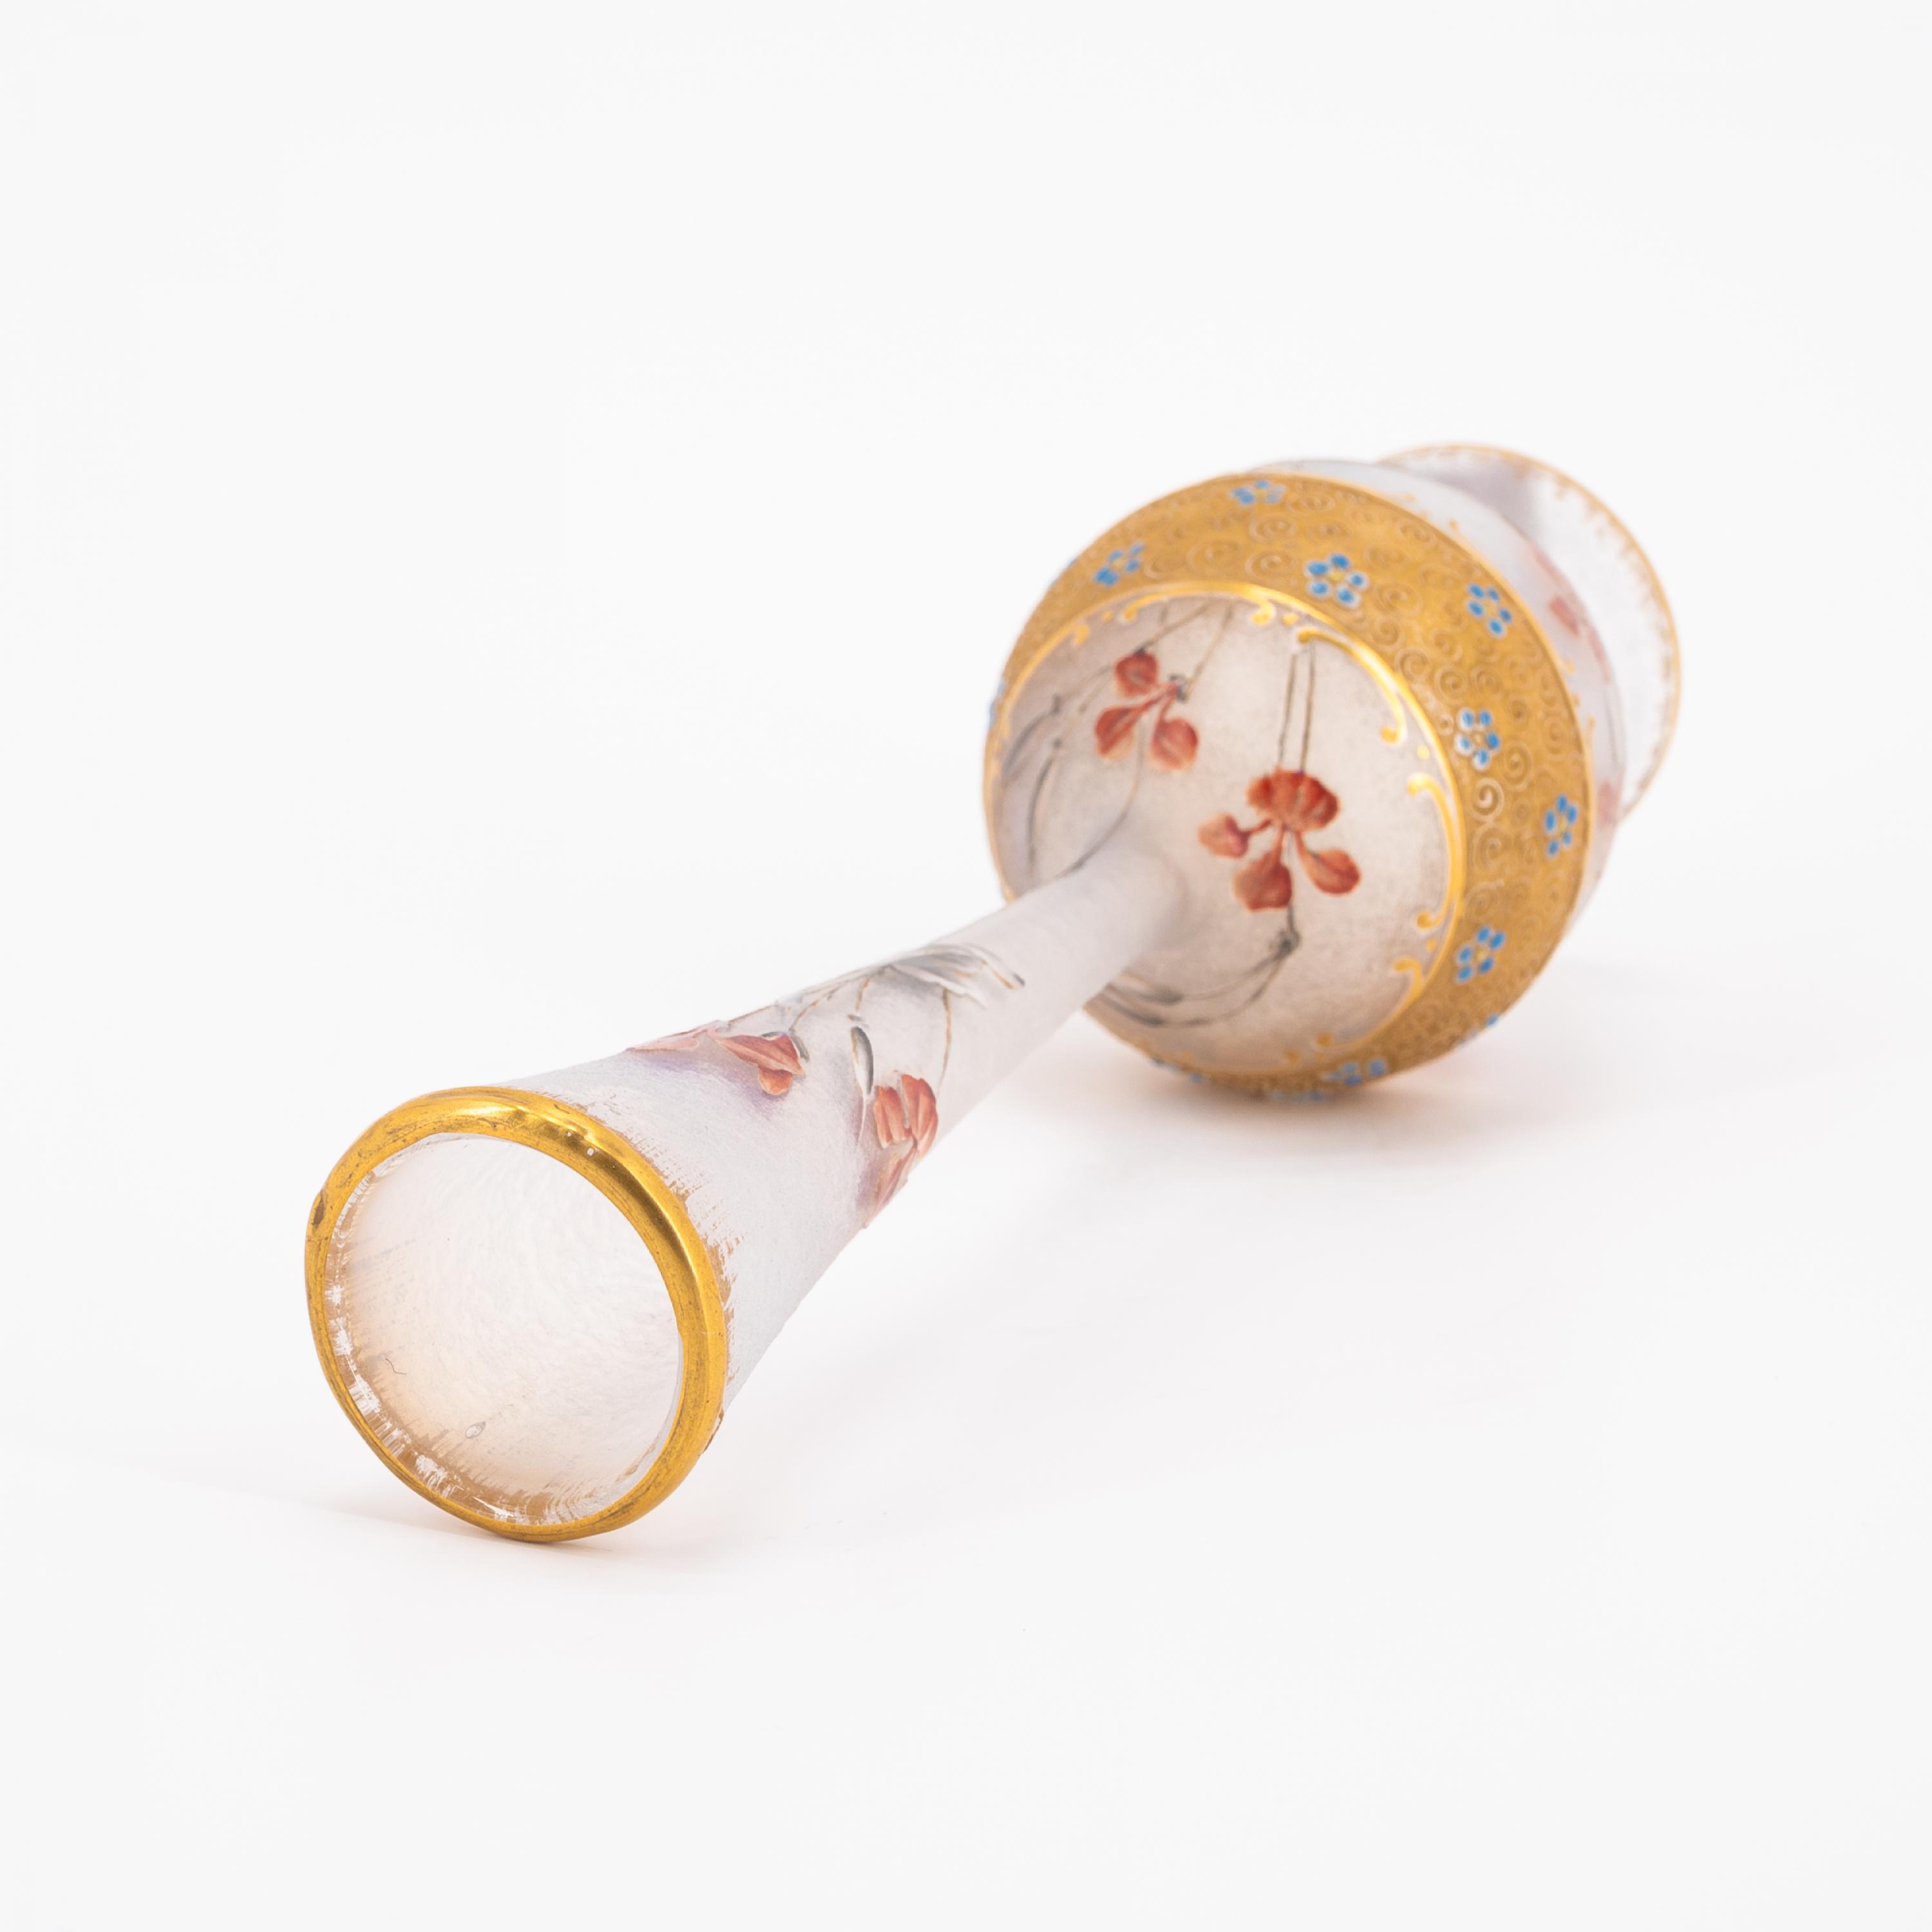 SMALL GLASS VASE WITH GOLD BORDER AND FINE FLORAL PATTERN - Image 5 of 6